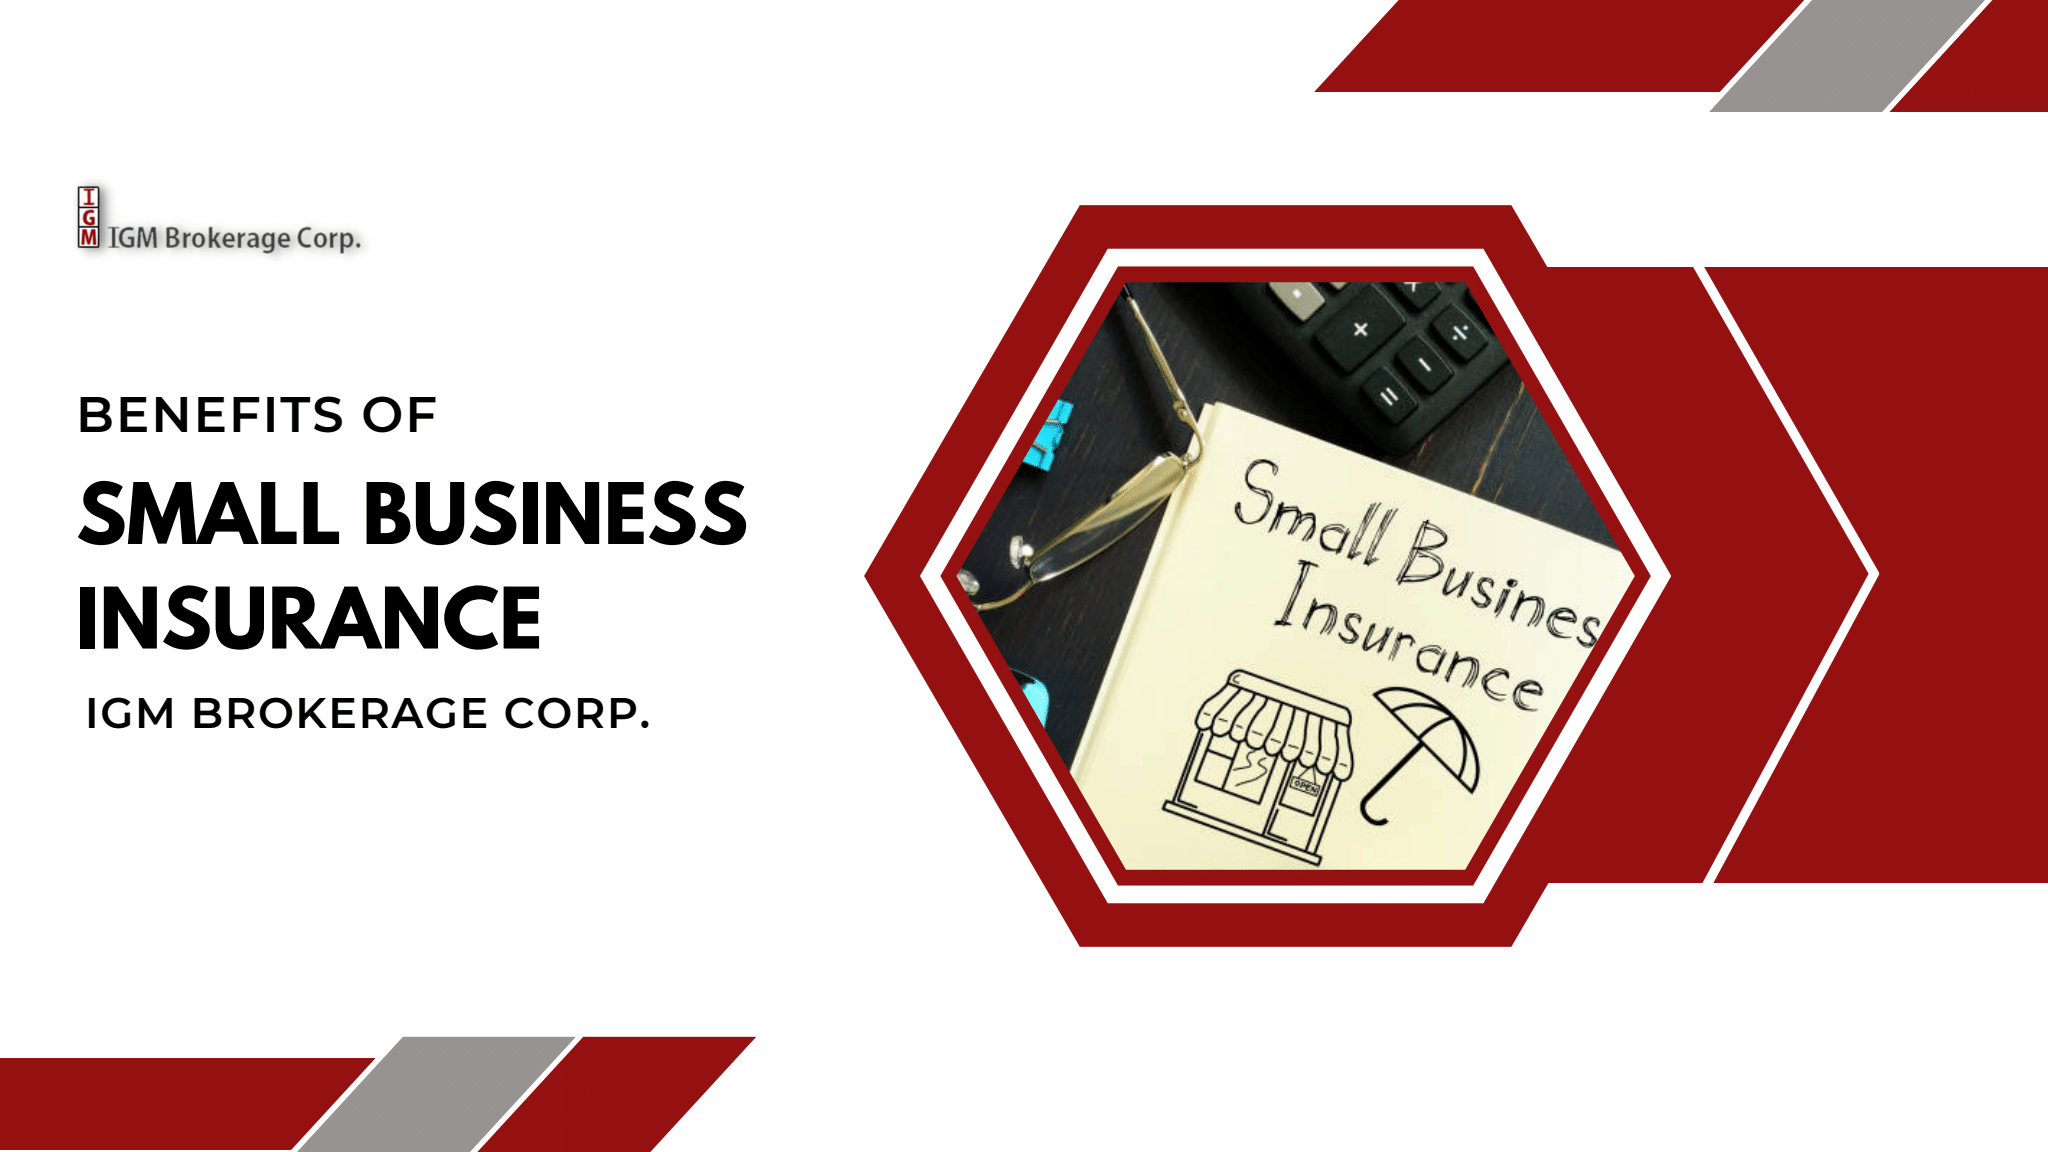 Learn about Small Business Insurance - IGM Brokerage Corp.